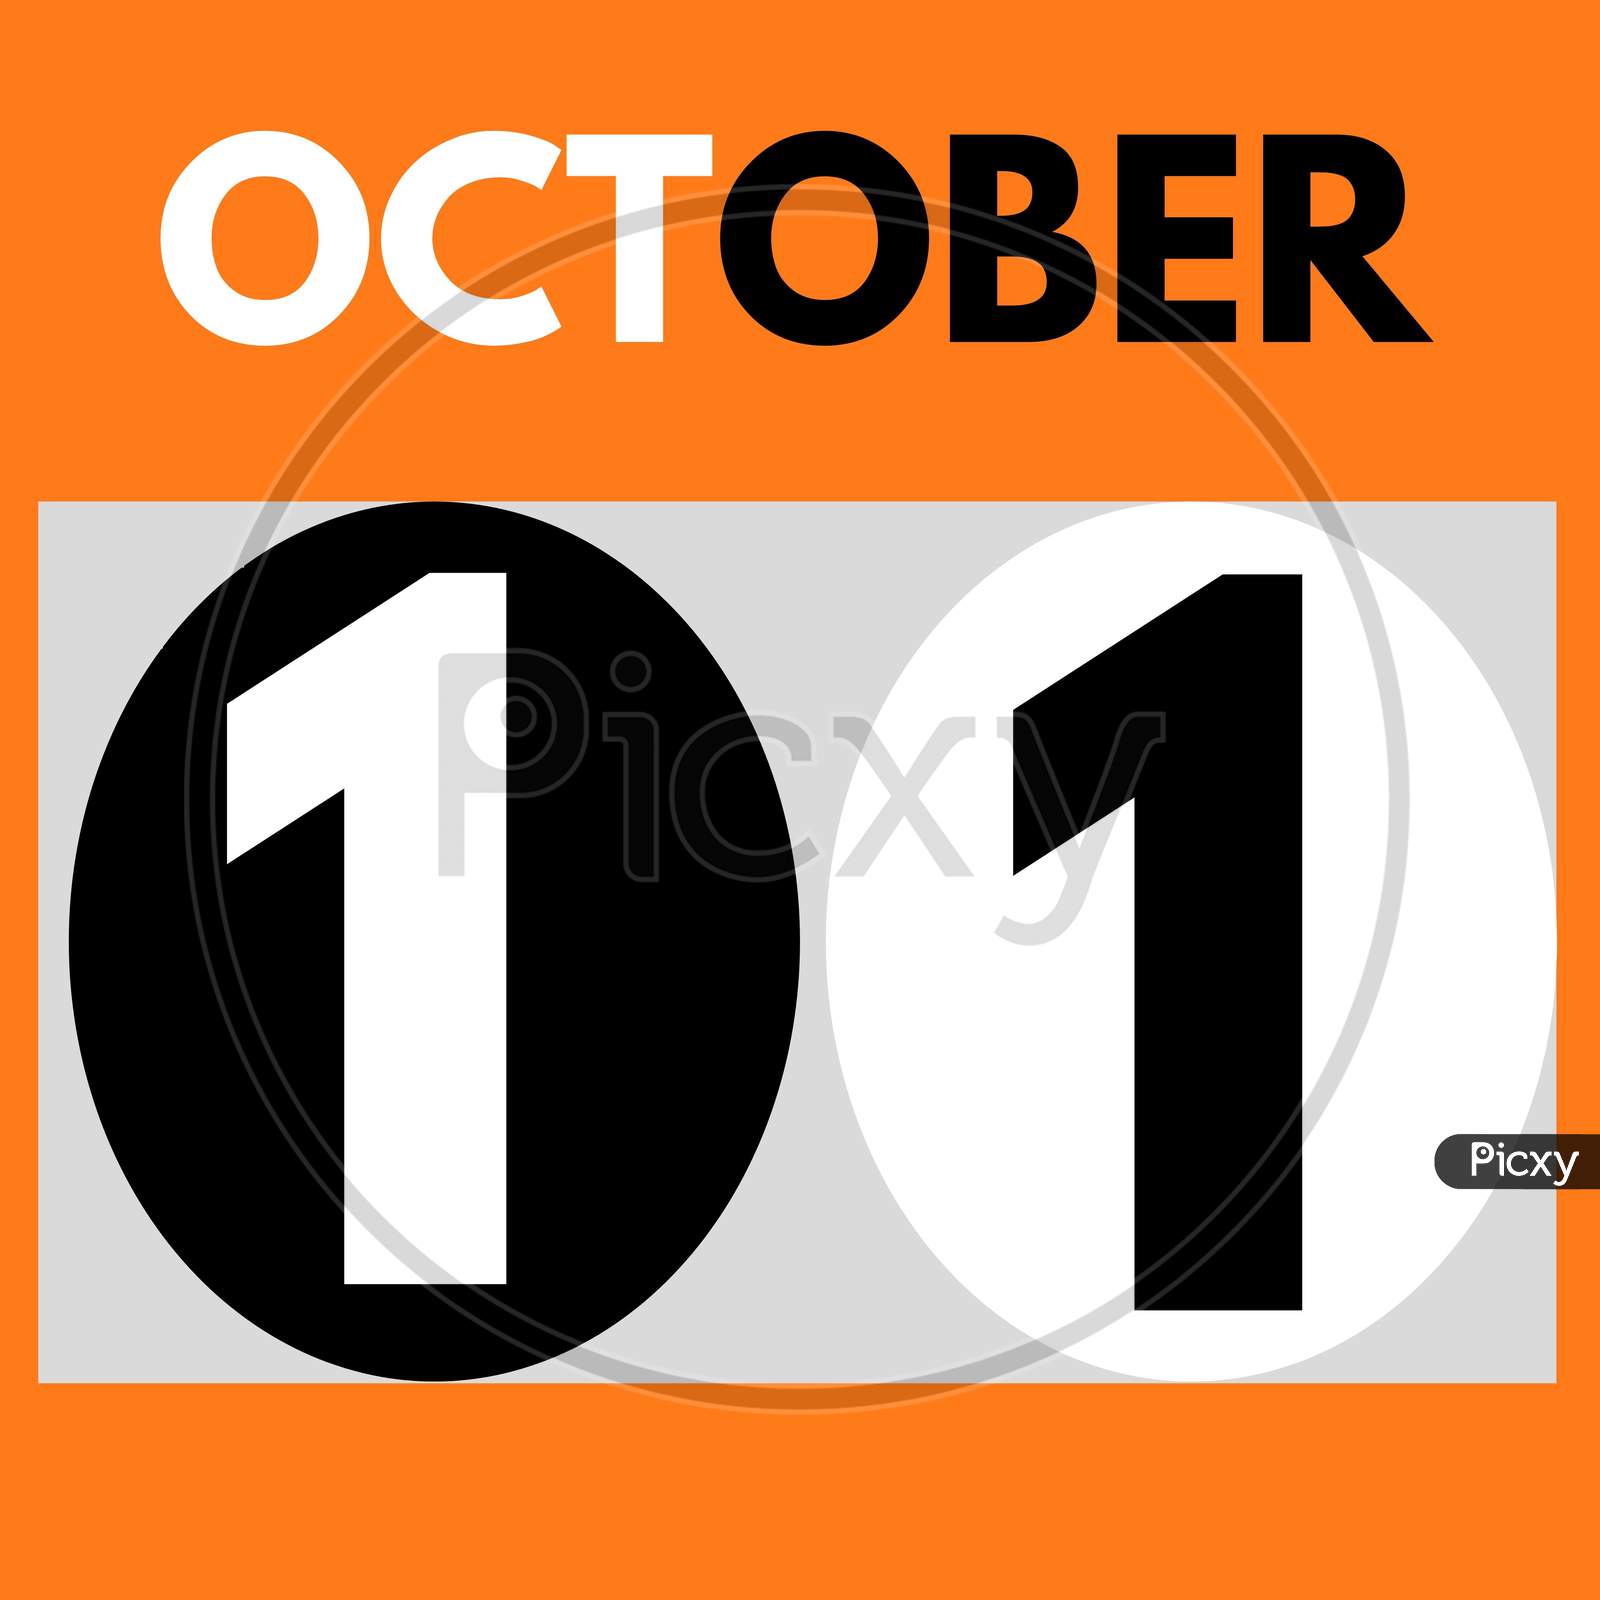 October 11 . Modern Daily Calendar Icon .Date ,Day, Month .Calendar For The Month Of October